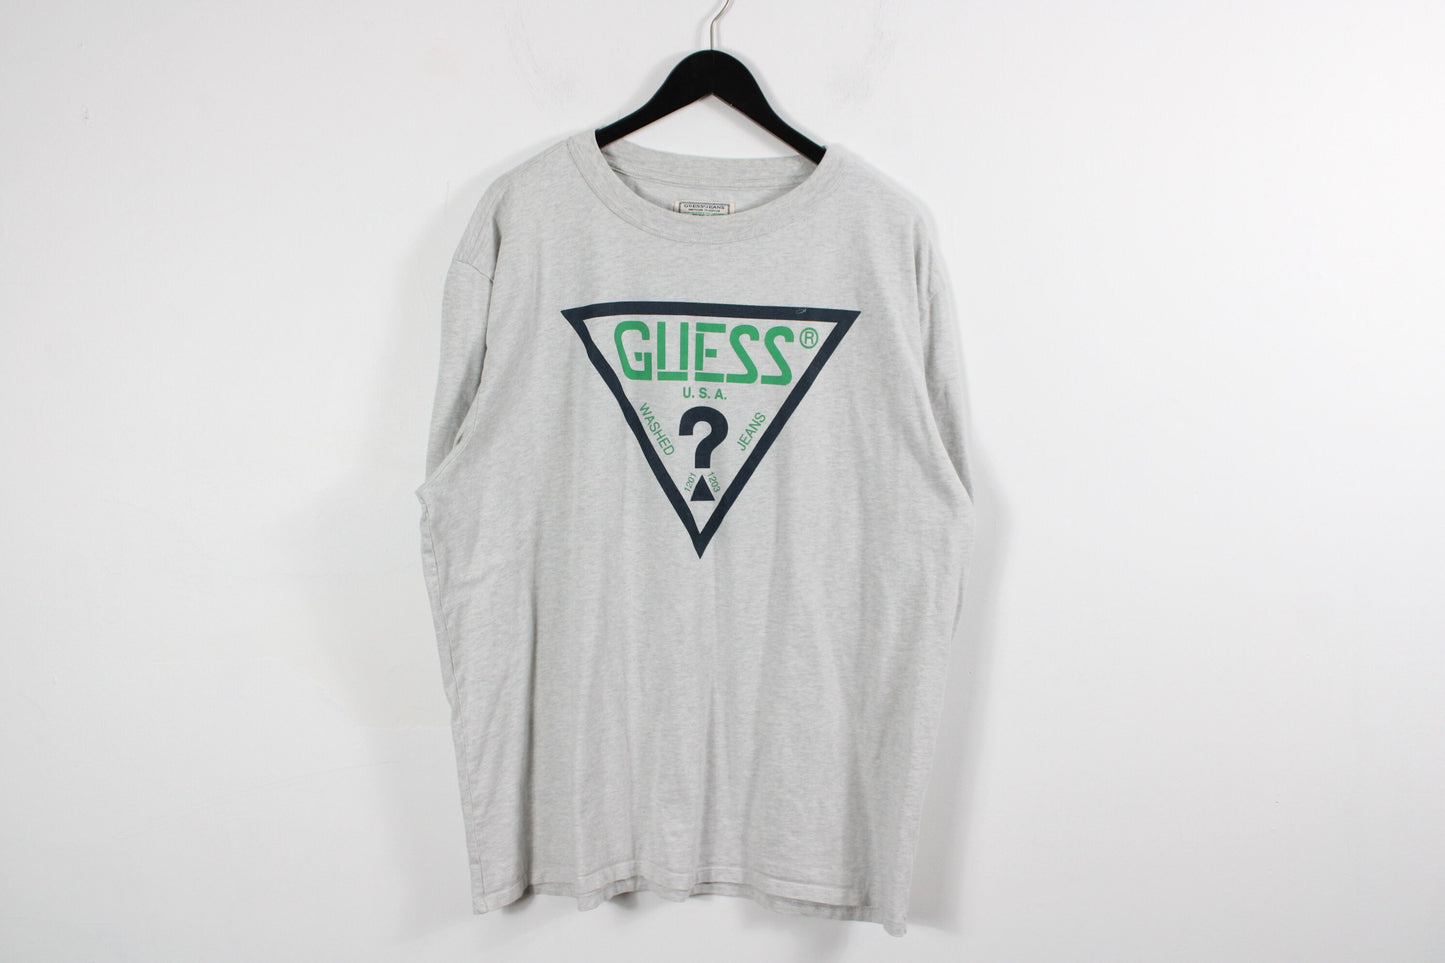 GuessT-Shirt / Vintage American Sports Graphic Promo Tee 90s / 1990s / Y2K / 2000s